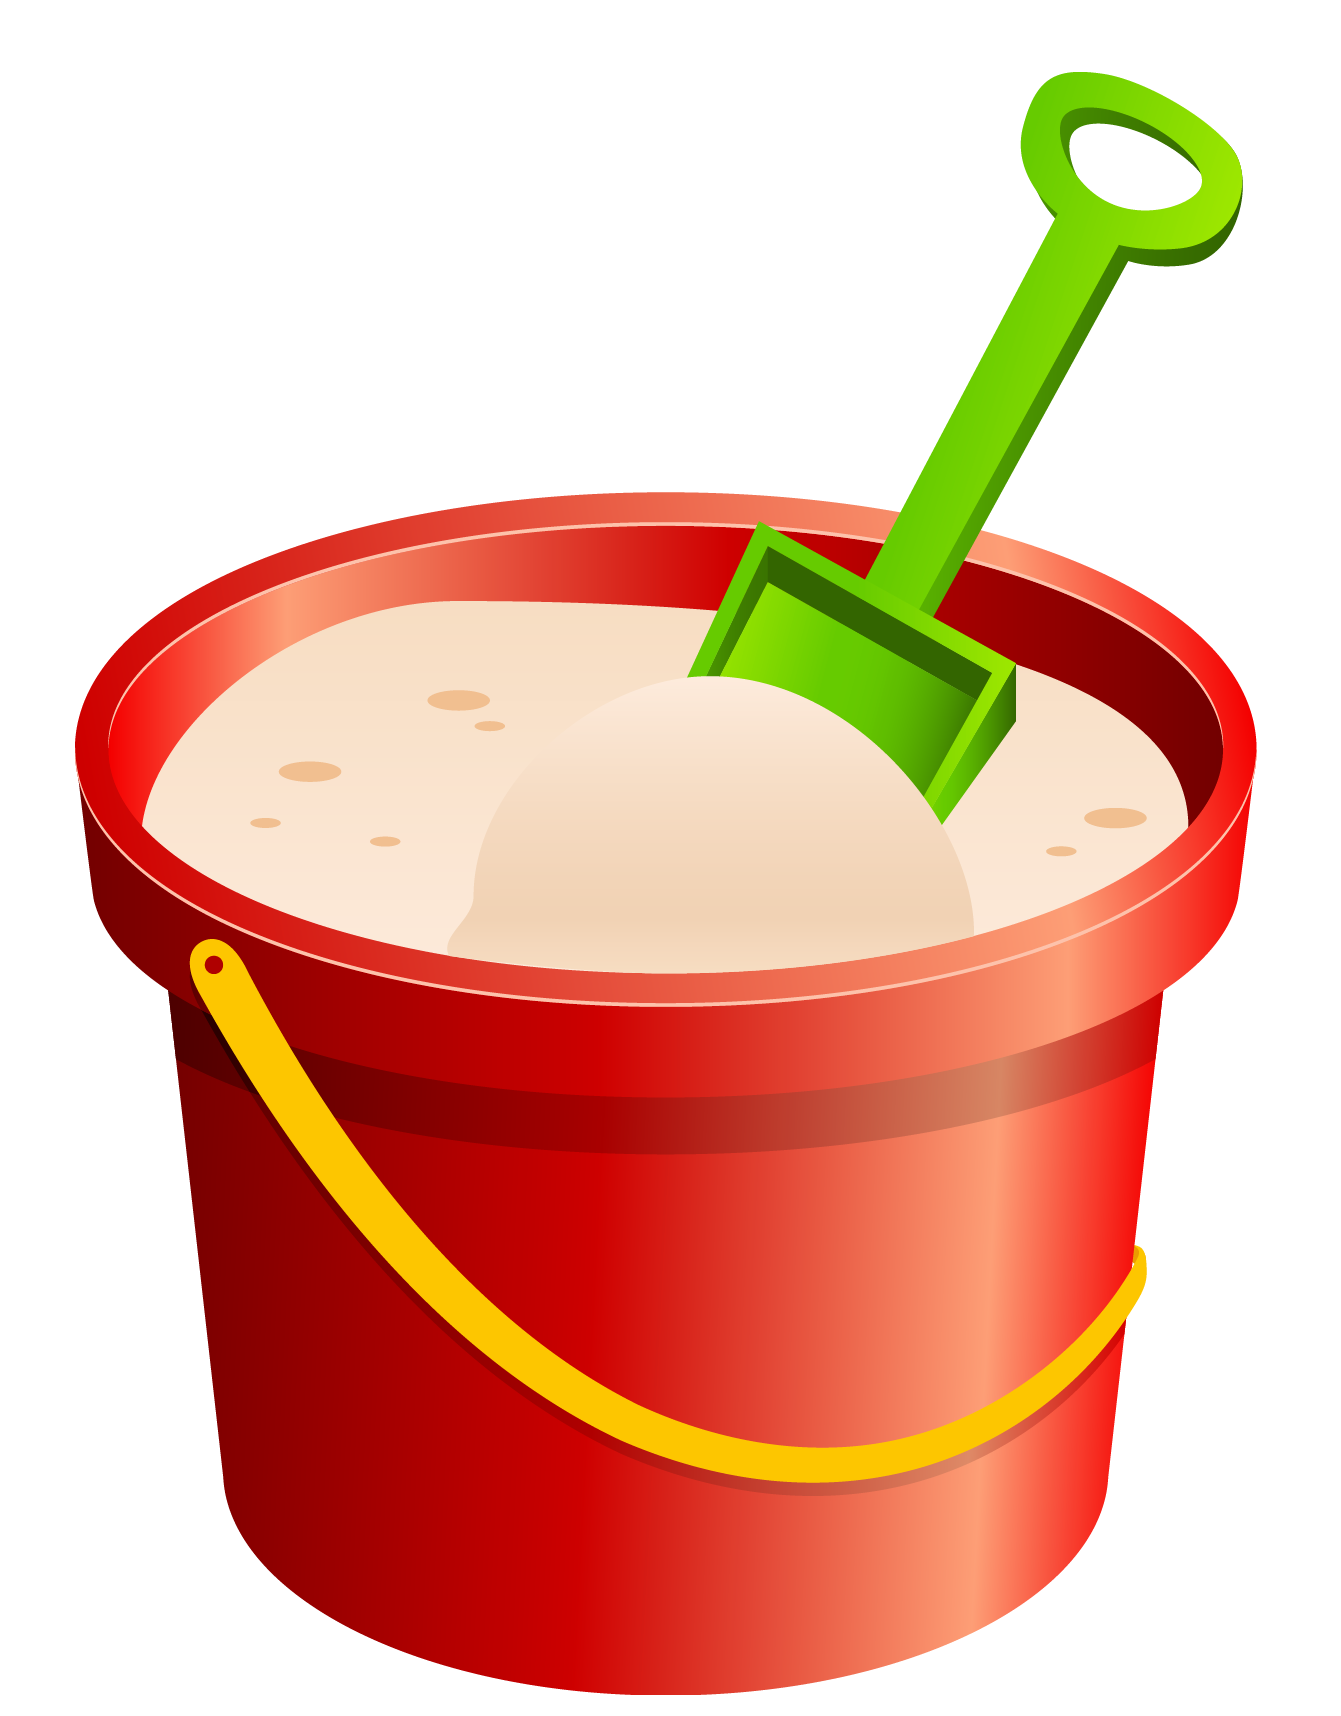 Sand Bucket Clip Art Red sand bucket and green shovel clipart image 